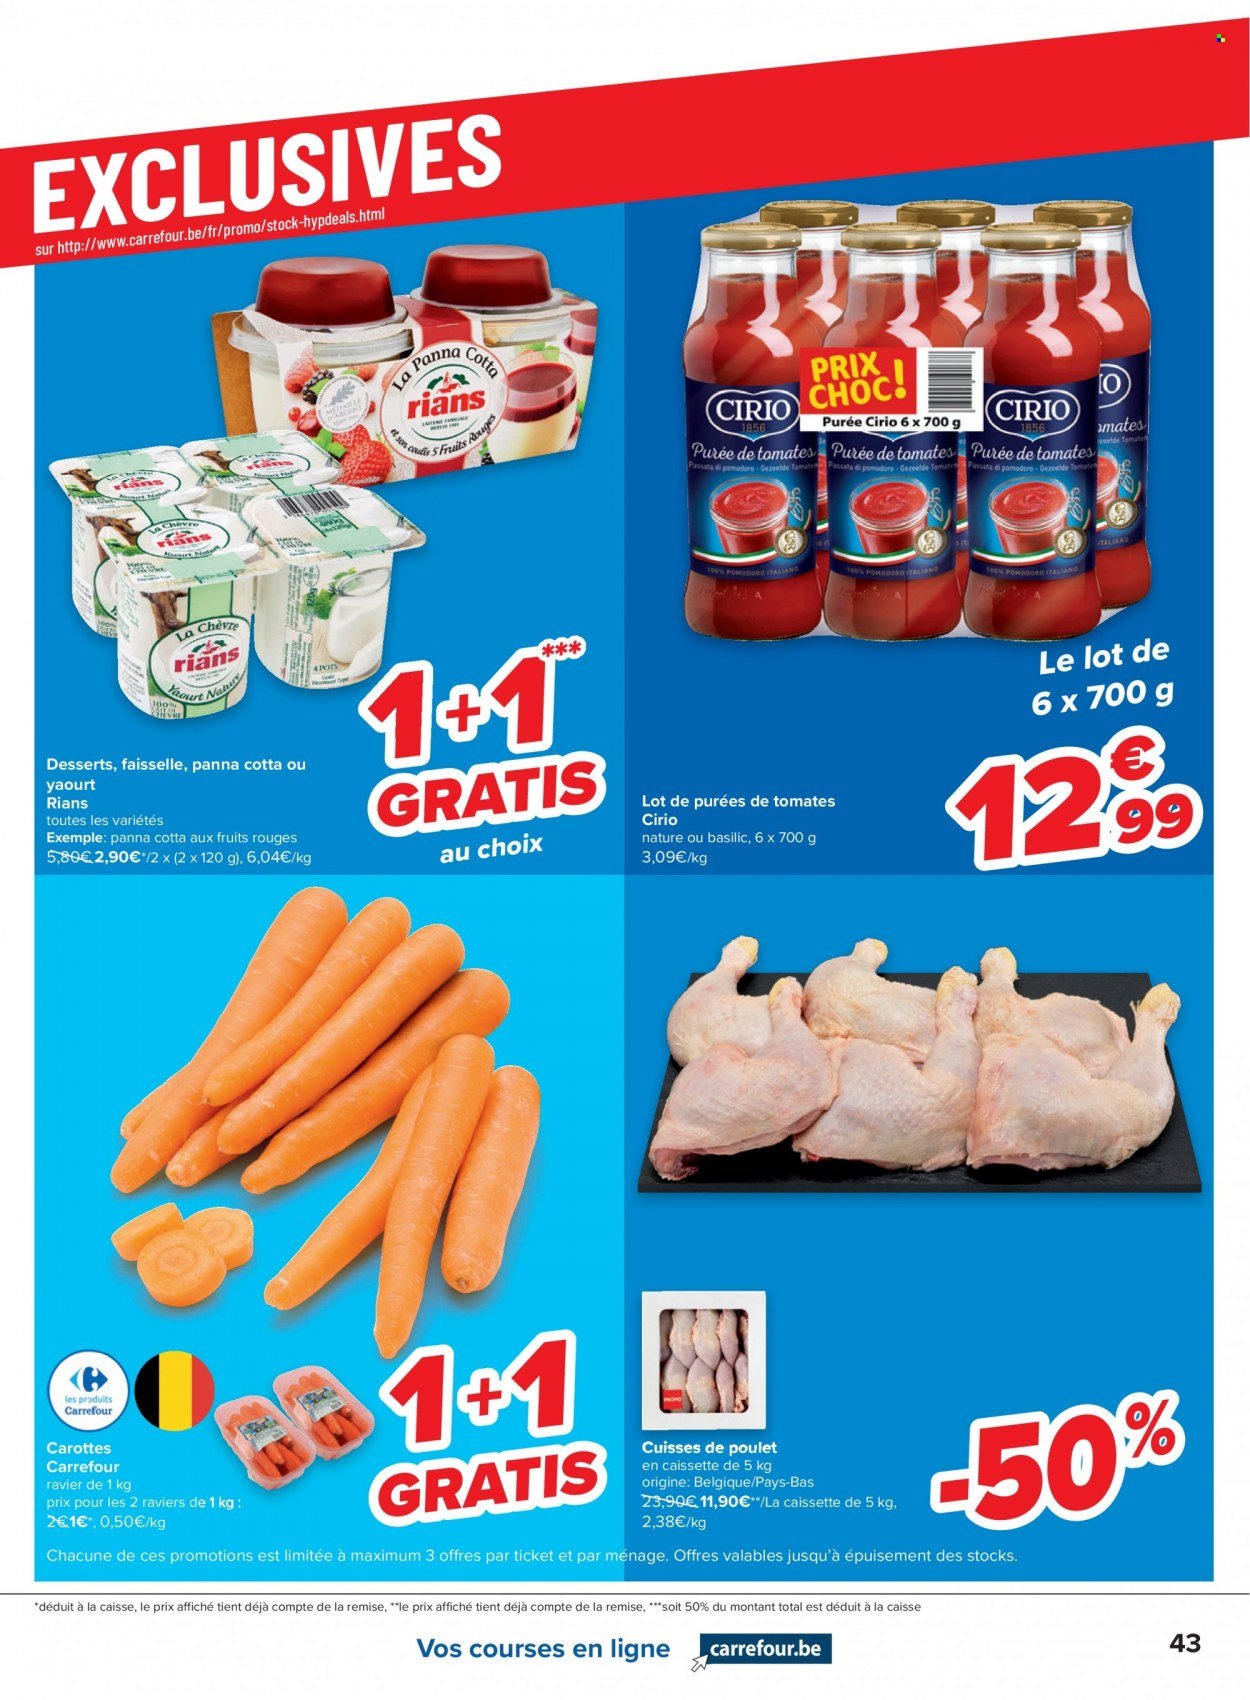 Catalogue Carrefour hypermarkt - 25.5.2022 - 31.5.2022. Page 43.